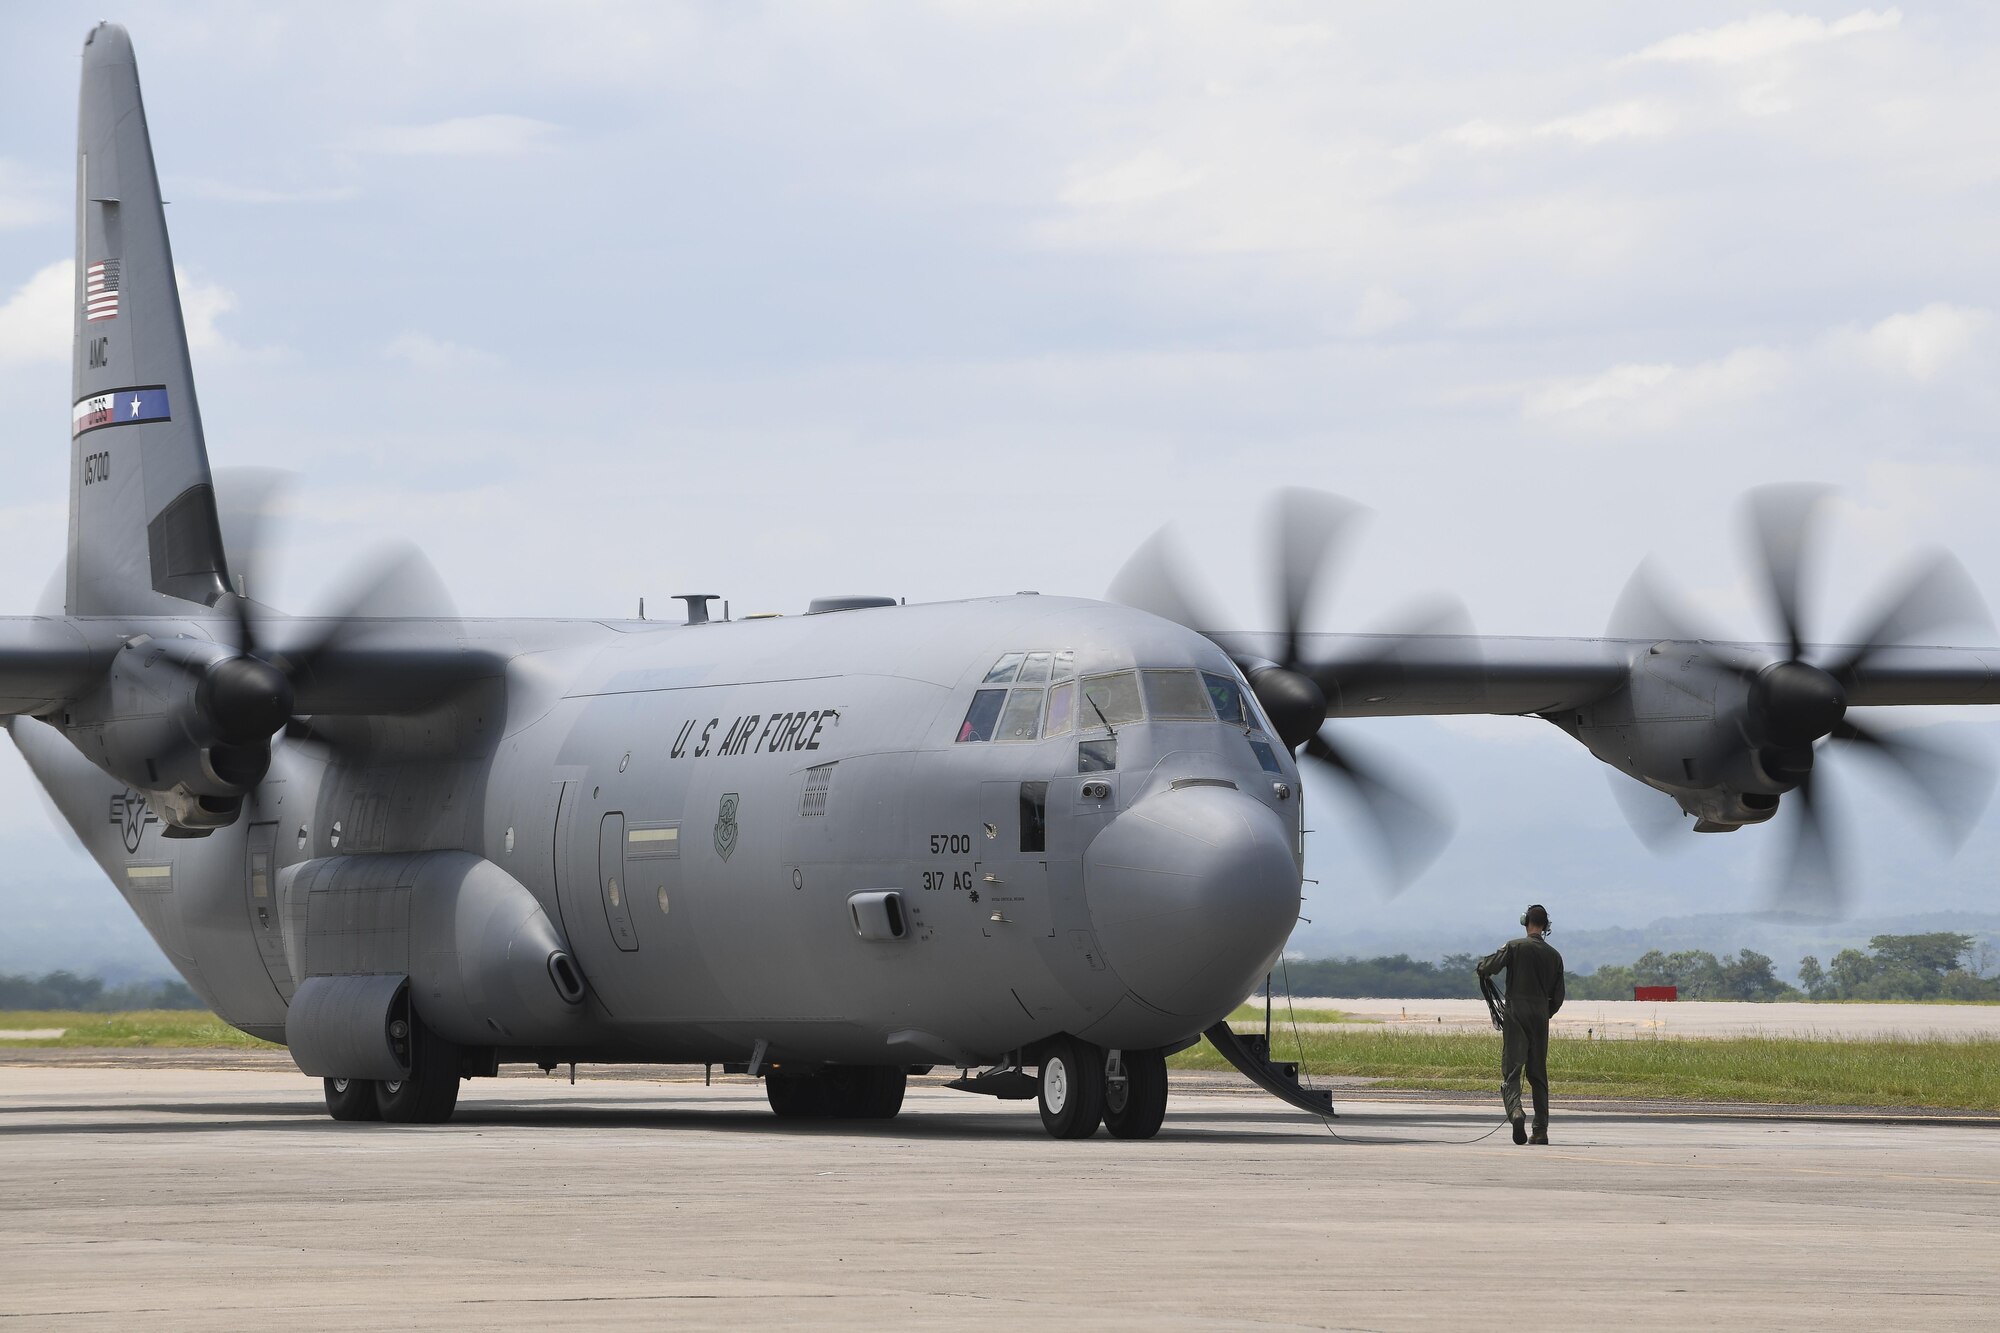 A C-130J Hercules from Dyess Air Force Base, Texas, goes through pre-flight checks at Soto Cano Air Base, Honduras, prior to deploying to Port-au-Prince, Haiti, to support the ongoing Hurricane Matthew disaster relief efforts. This cargo aircraft deployed to Soto Cano AB within hours of being requested to transport additional personnel and equipment necessary to sustain flight and maintenance operations in Haiti.